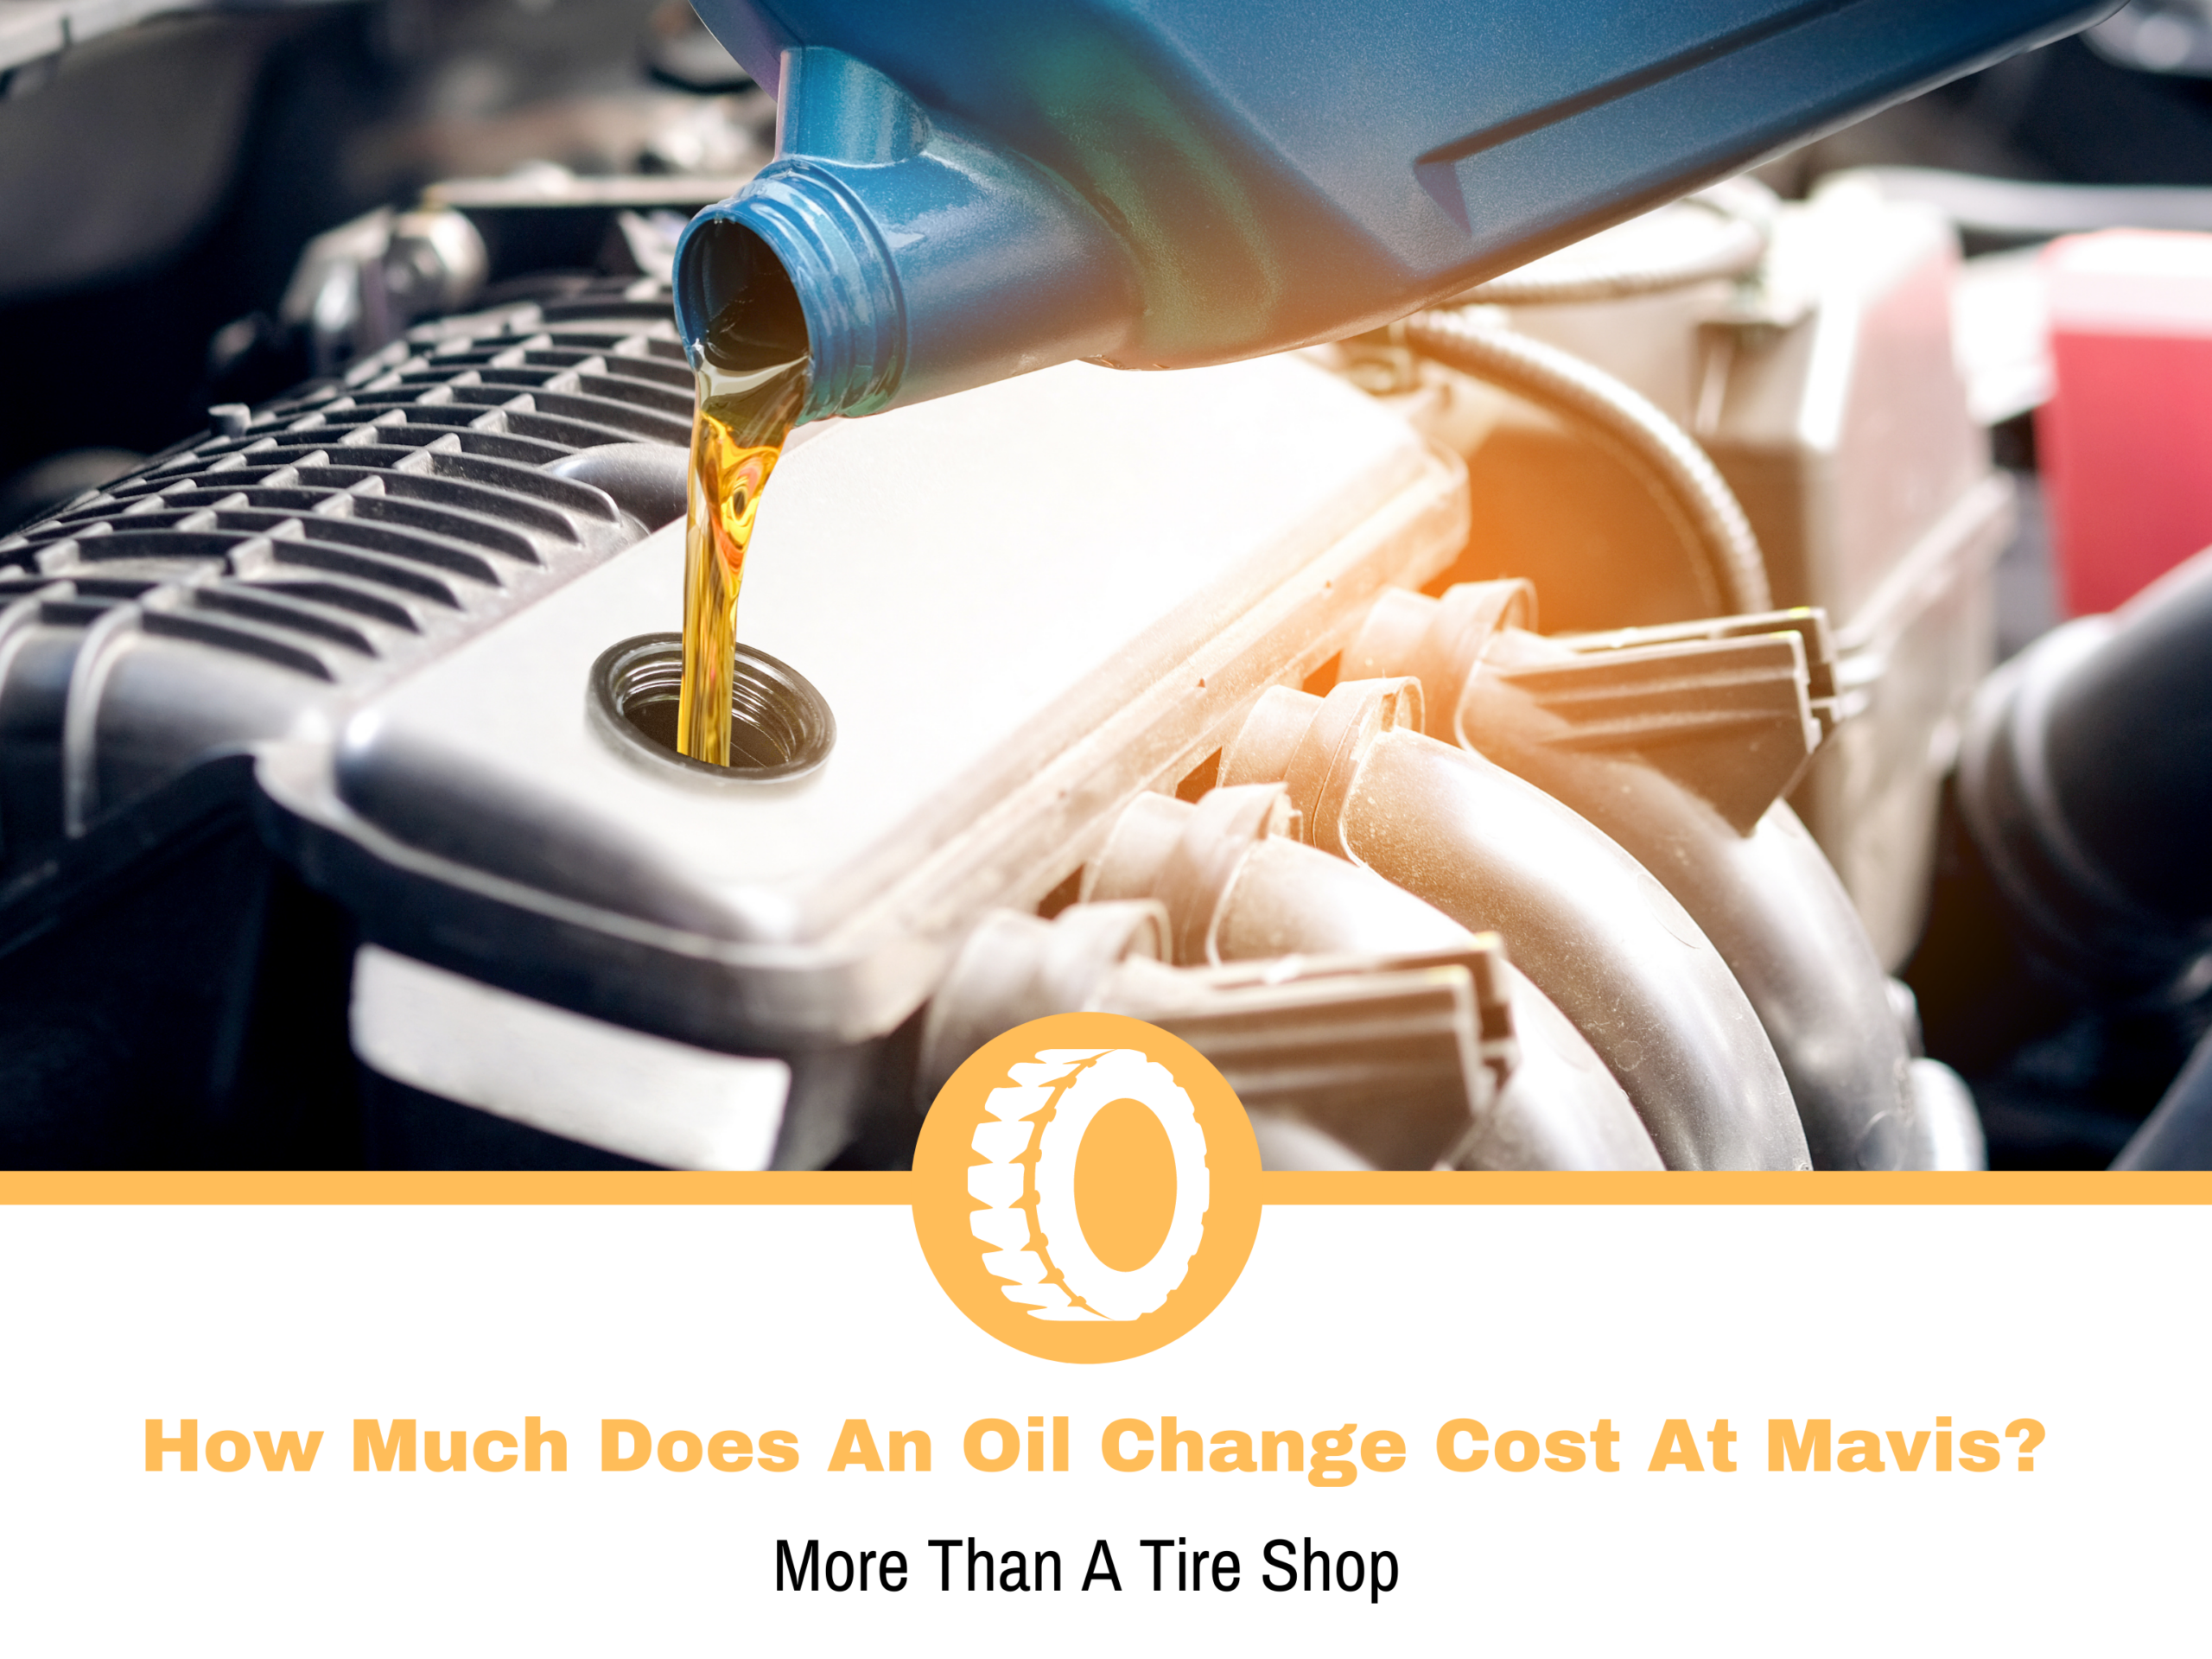 How Much Does An Oil Change Cost At Mavis